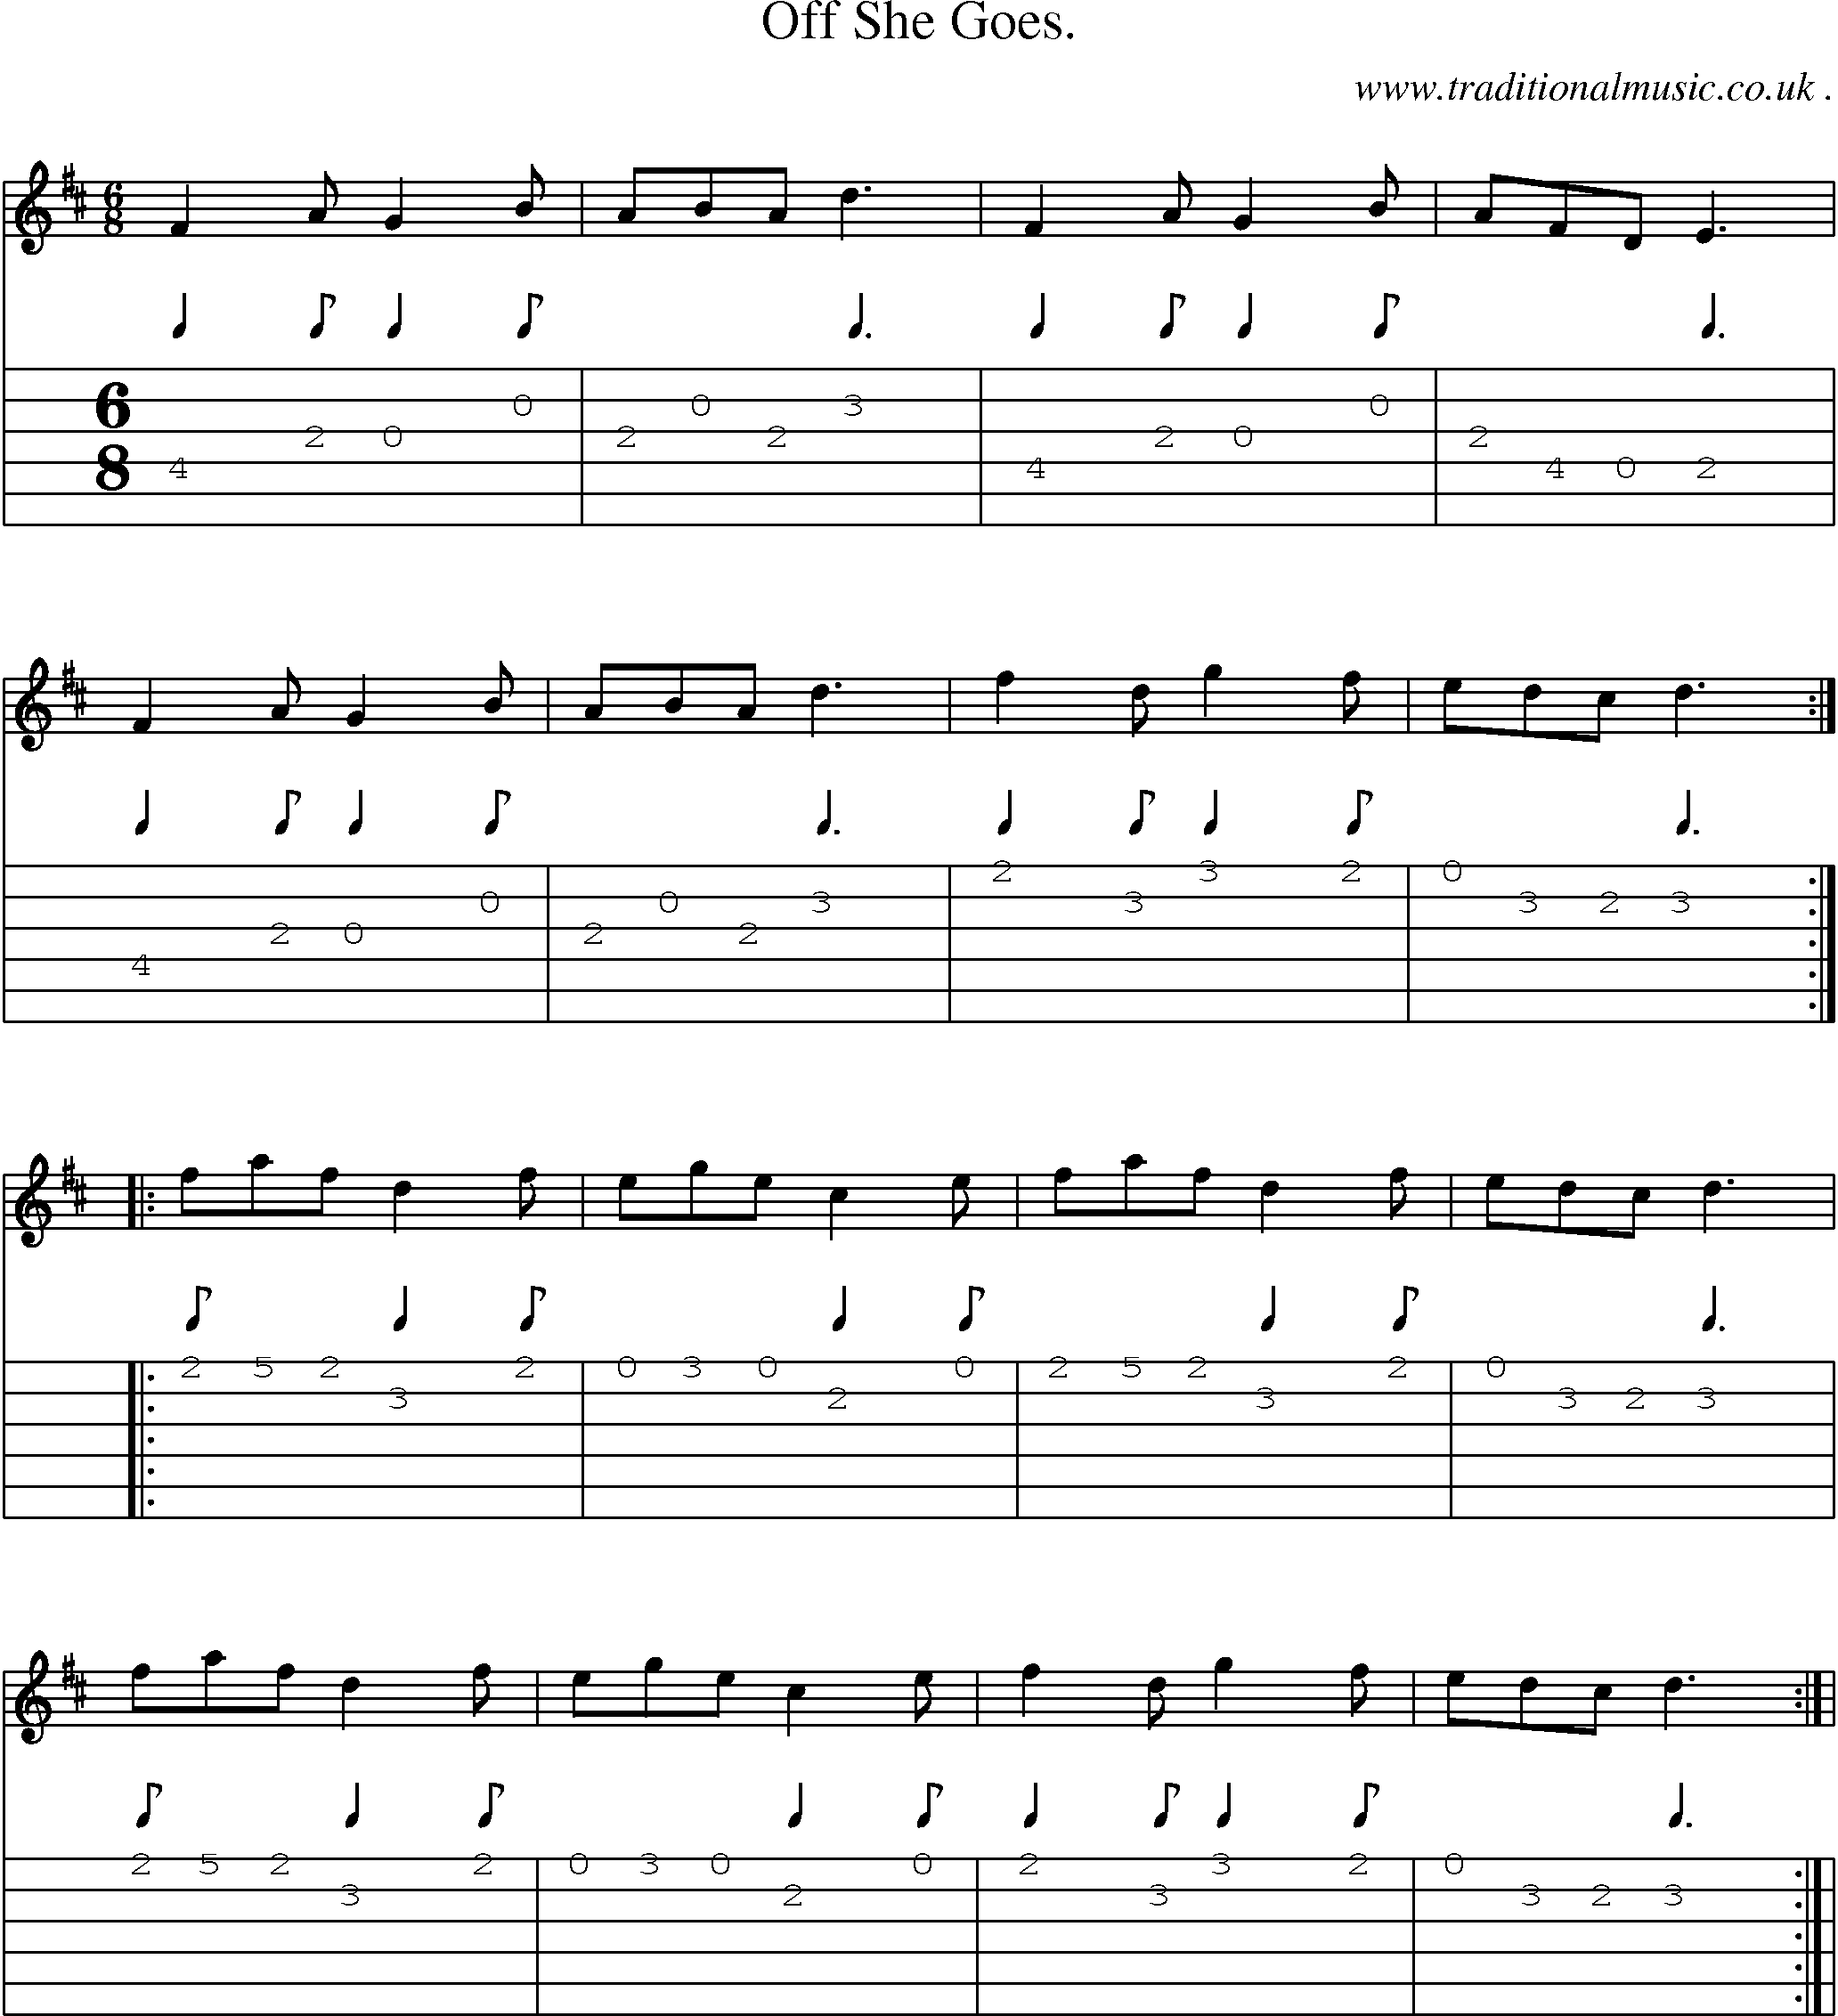 Sheet-Music and Guitar Tabs for Off She Goes